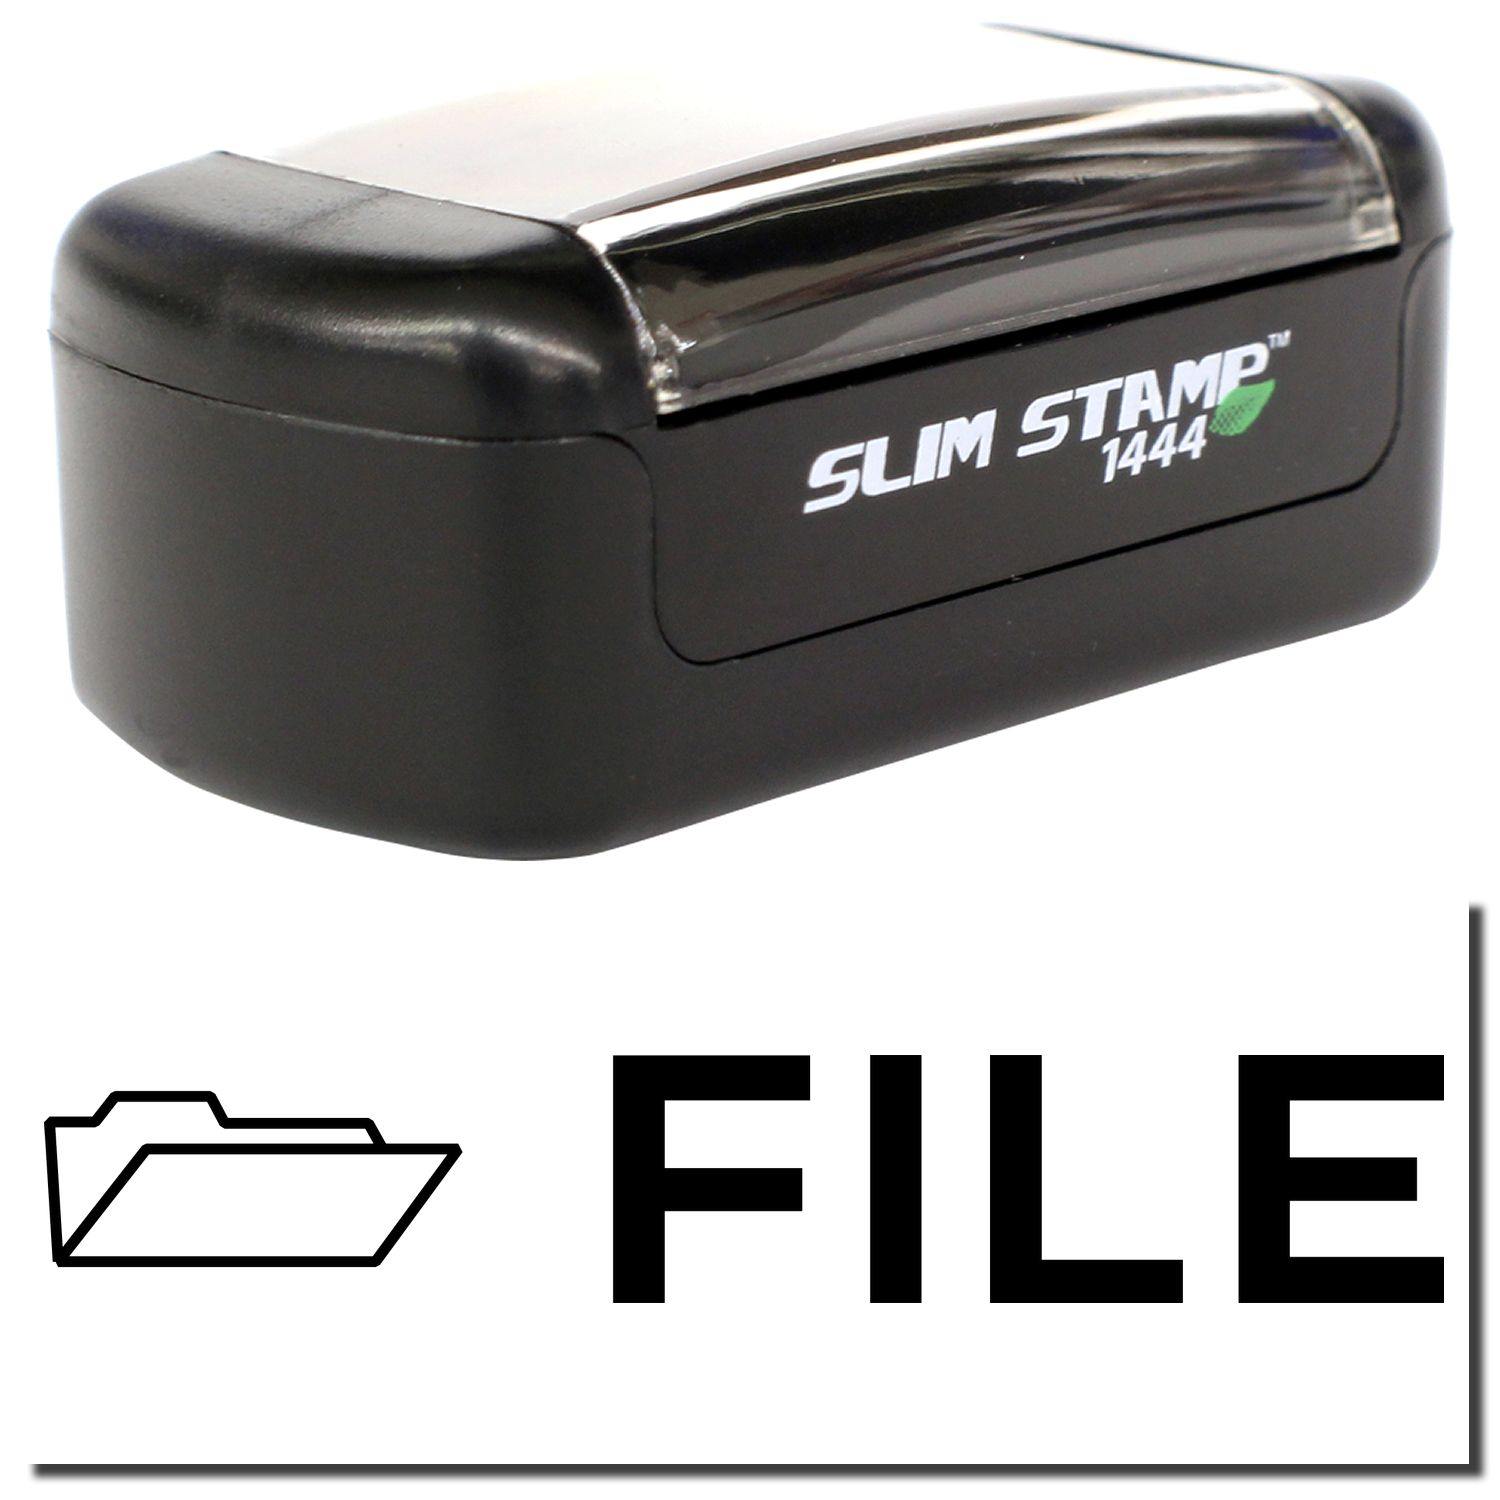 A stock office pre-inked stamp with a stamped image showing how the text "FILE" with an icon of a folder on the left side is displayed after stamping.